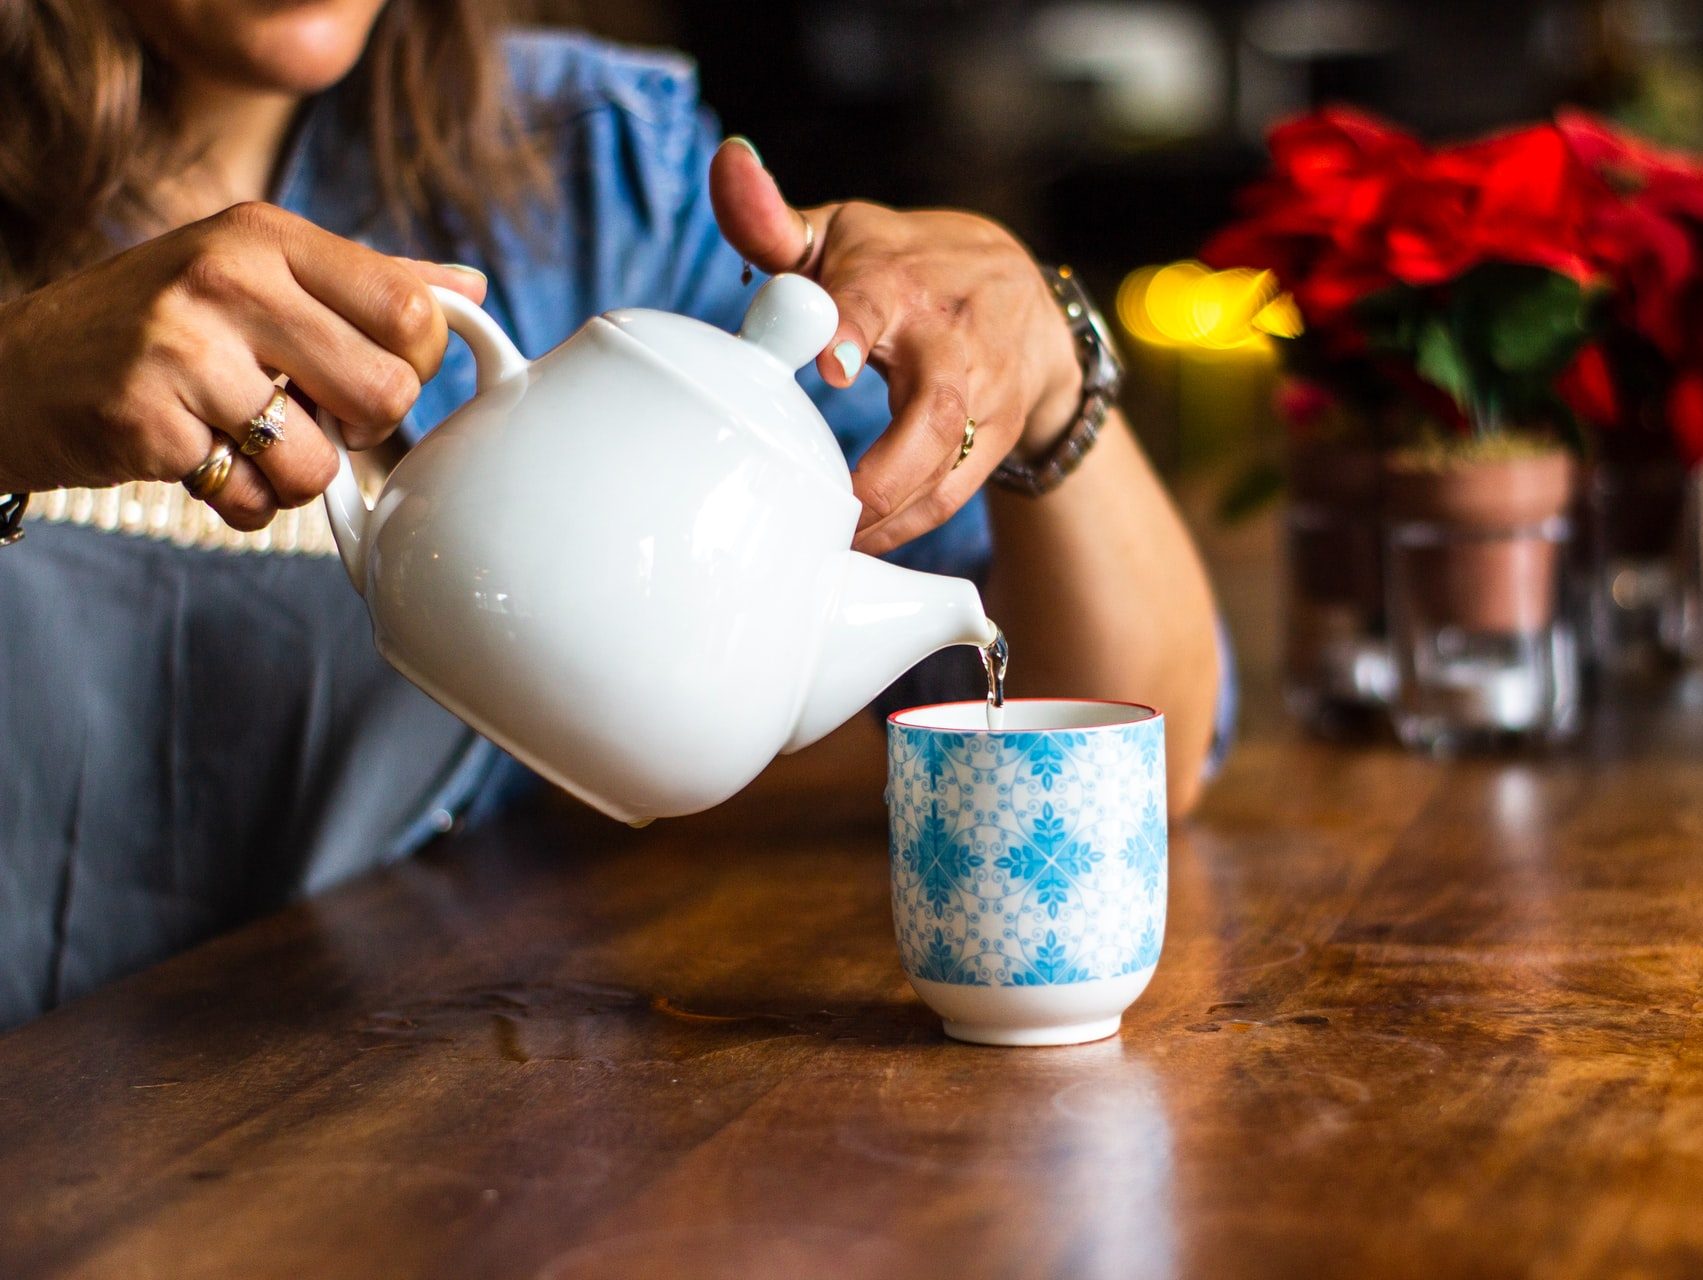 unknown person holding white ceramic kettle